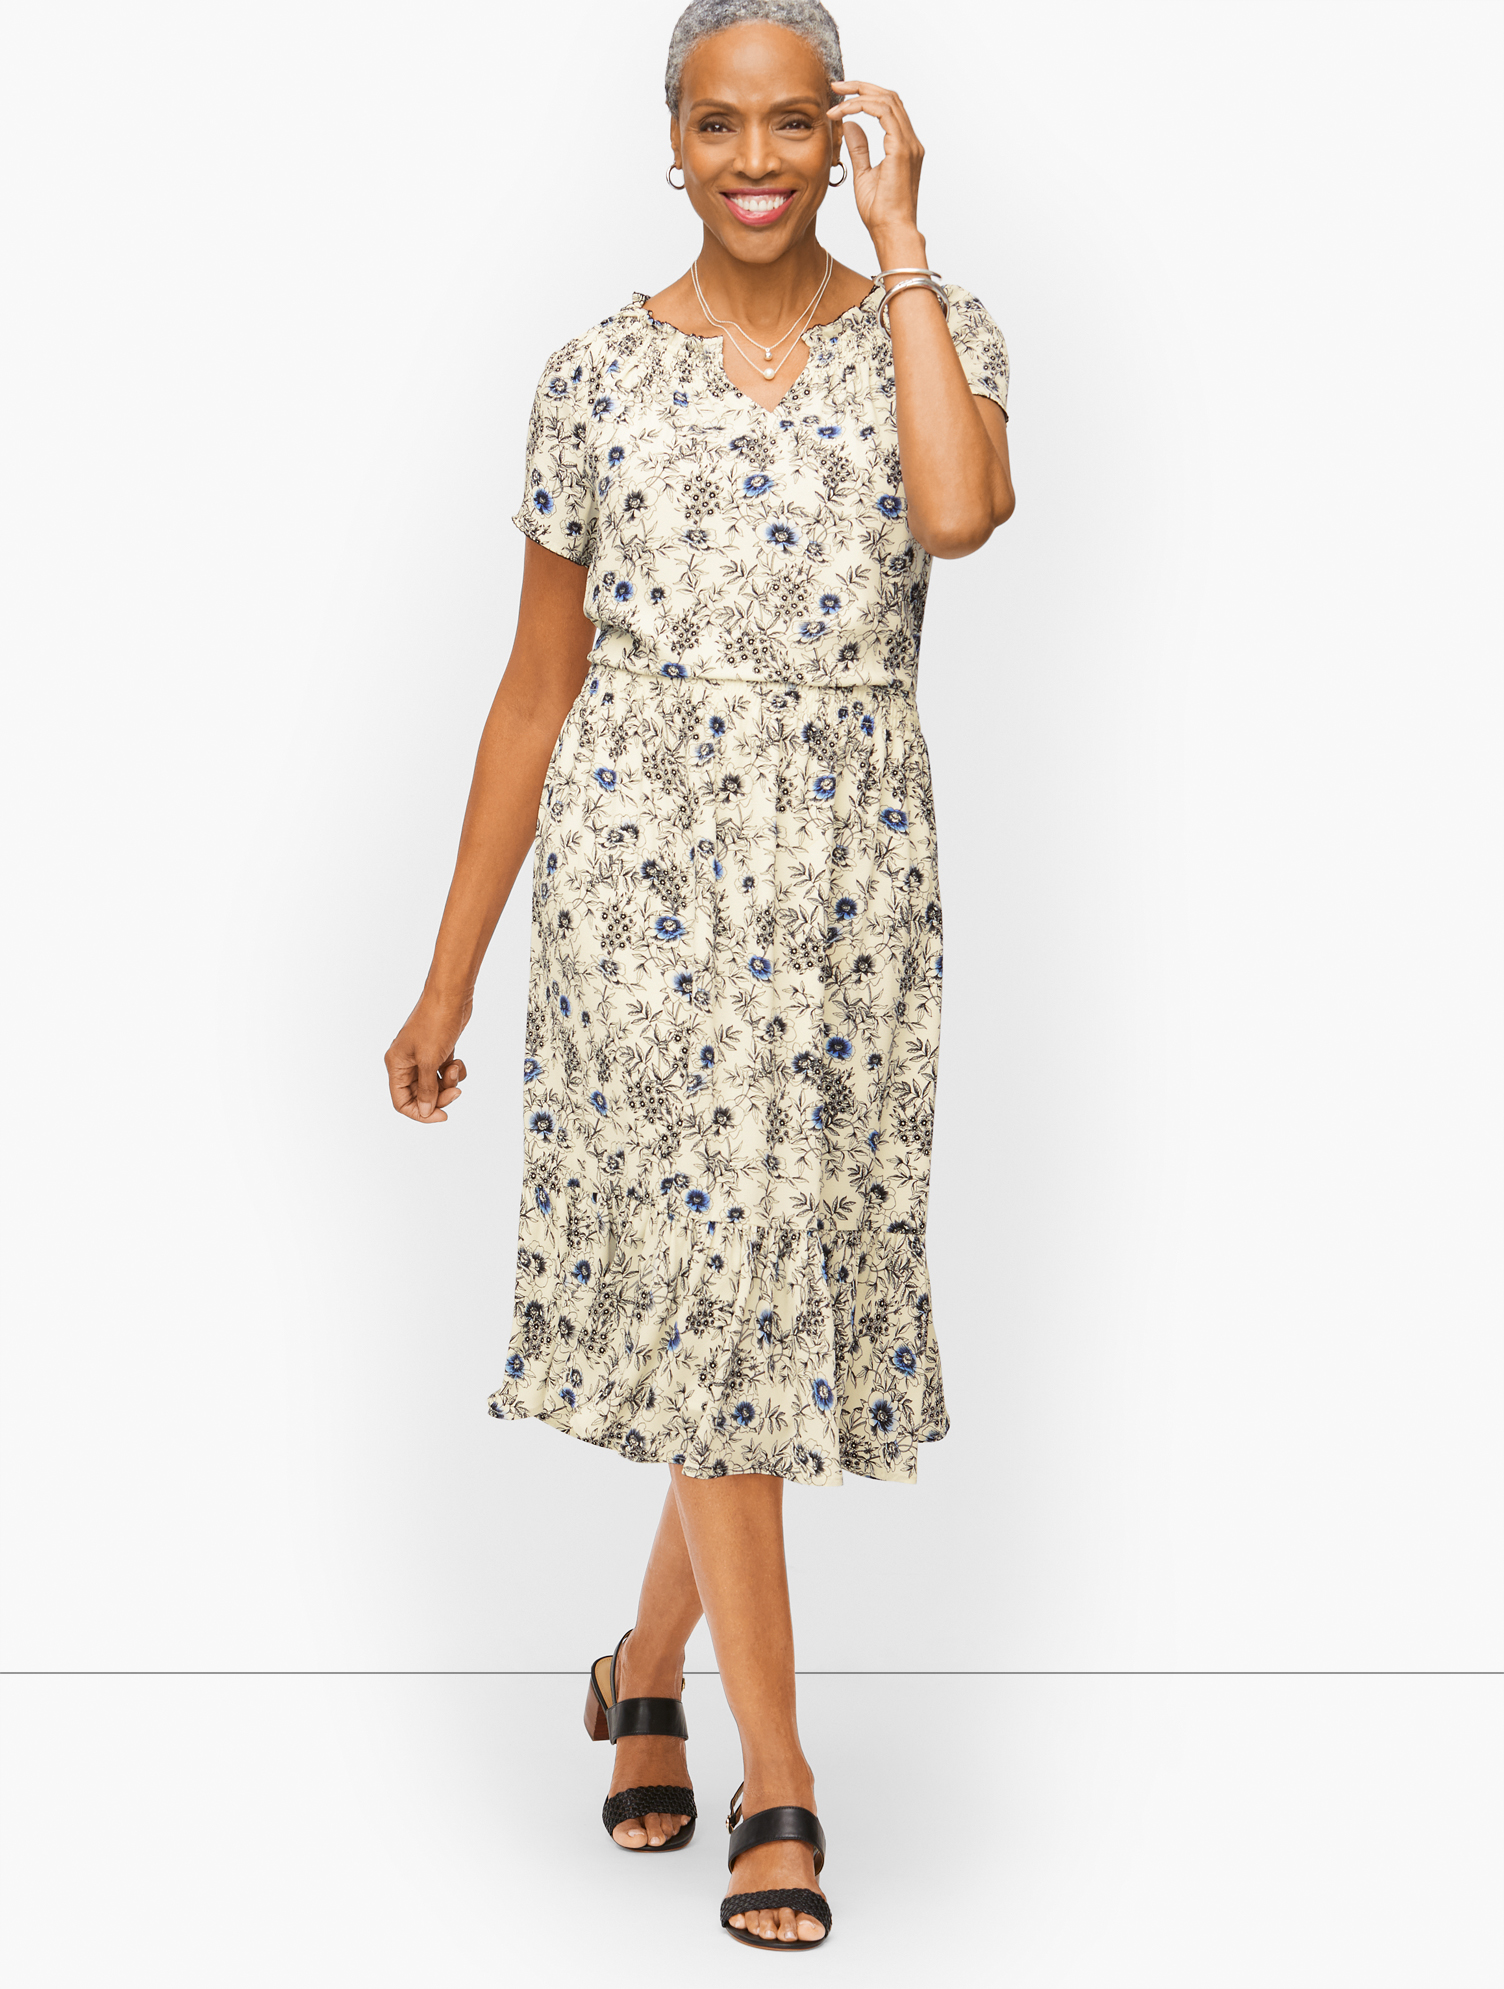 Talbots Smocked Fit & Flare Dress - Intricate Floral - Ivory/biscayne Blue - Small  In Ivory,biscayne Blue